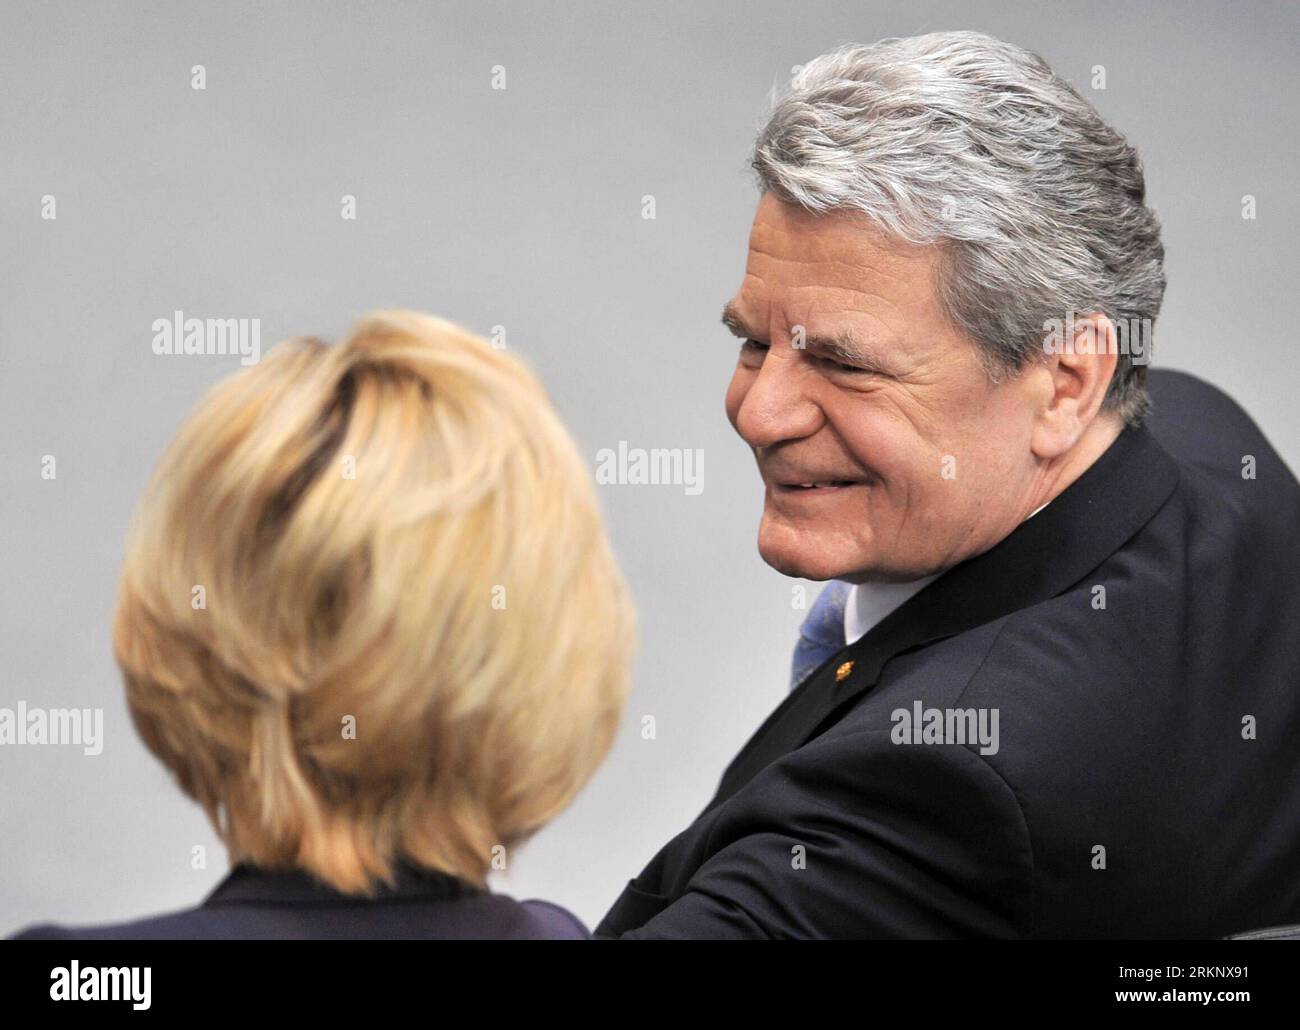 Bildnummer: 57617672  Datum: 23.03.2012  Copyright: imago/Xinhua (120323) -- BERLIN, March 23, 2012 (Xinhua) -- Newly elected German President Joachim Gauck (R) talks to his predecessor s wife Bettina Wulff during his swearing-in ceremony at the Reichstag building in Berlin, capital of Germany, March 23, 2012. Gauke became the country s 11th president since the end of World War II. (Xinhua/Gonzalo Silva)(yt) GERMANY-PRESIDENT-SWEARING-IN PUBLICATIONxNOTxINxCHN Politik People GER Bundespräsident x0x xub Vereidigung 2012 quer Highlight premiumd      57617672 Date 23 03 2012 Copyright Imago XINHU Stock Photo